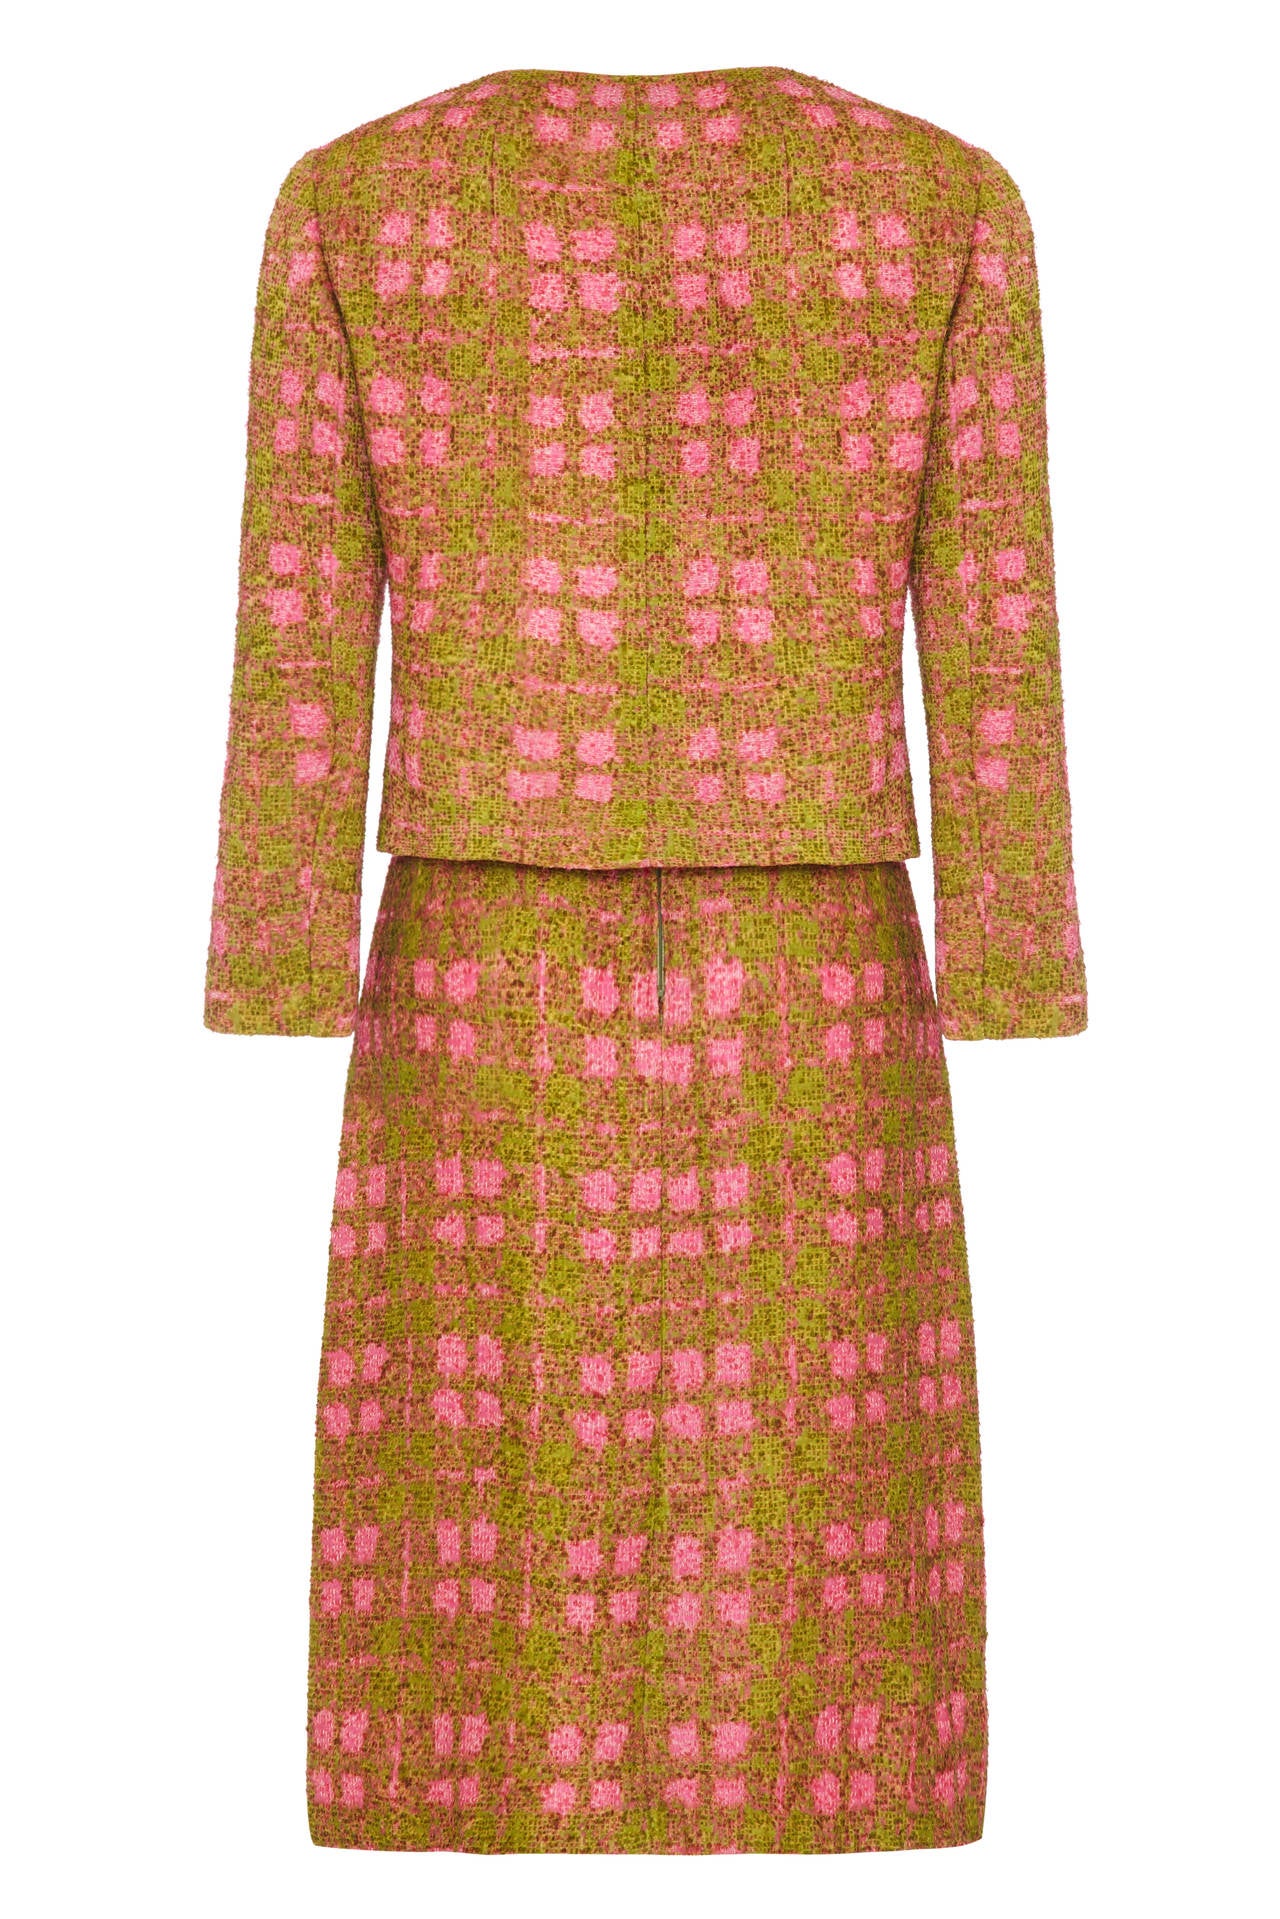 Beautiful pink and green woven ribbon checked skirt suit circa 1960s by Christian Dior with the New York label attached.  The jacket fastens with two buttons at the front, poppers at the neck and is fully lined in a pale pink silk.  The skirt is